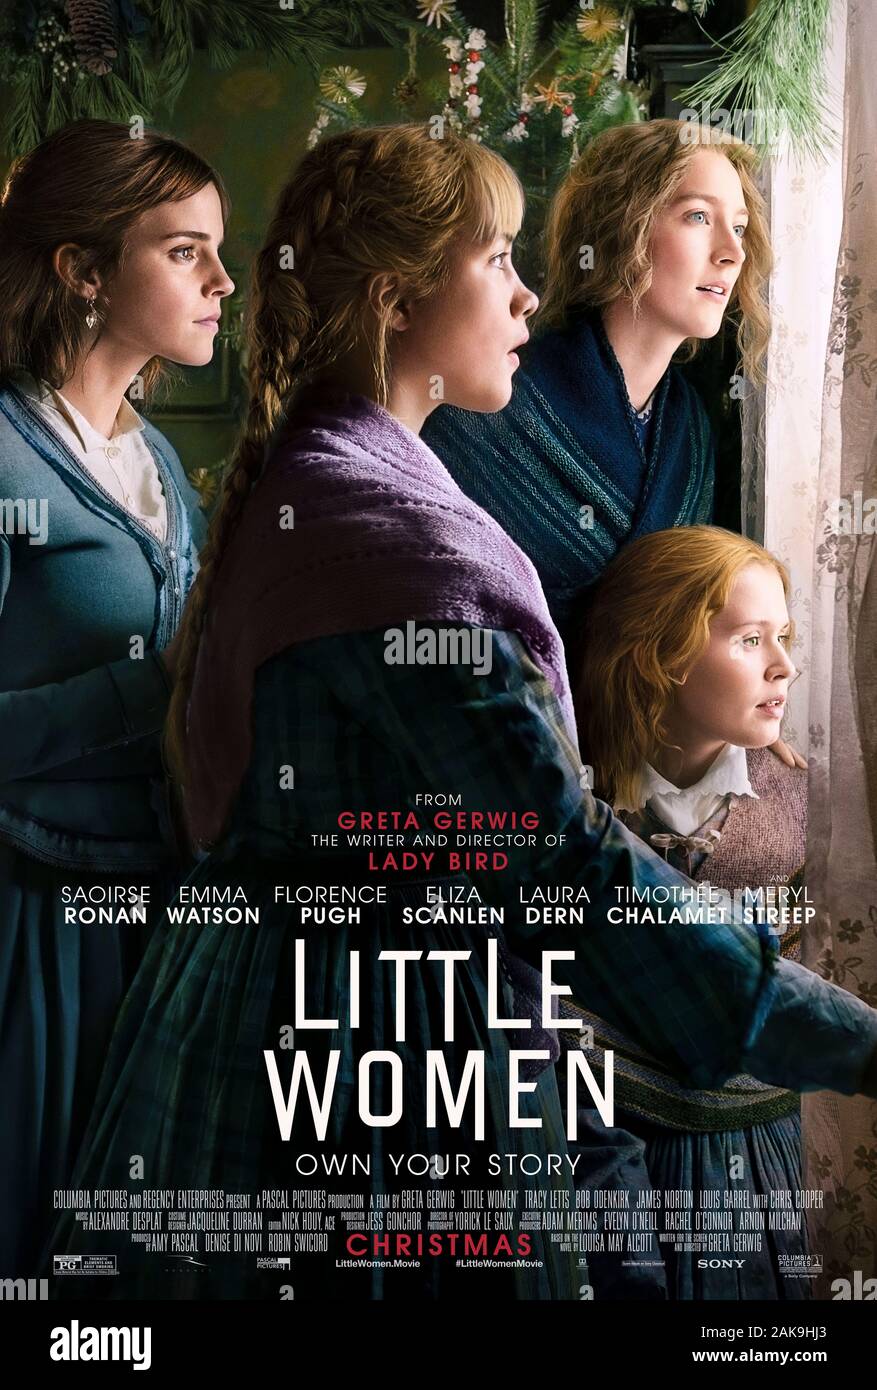 Little Women (2019) directed by Greta Gerwig and starring Saoirse Ronan, Emma Watson, Florence Pugh and Eliza Scanlen. Latest big screen adaptation of Louisa May Alcott’s much loved coming of age novel about 4 sisters and their mother. Stock Photo